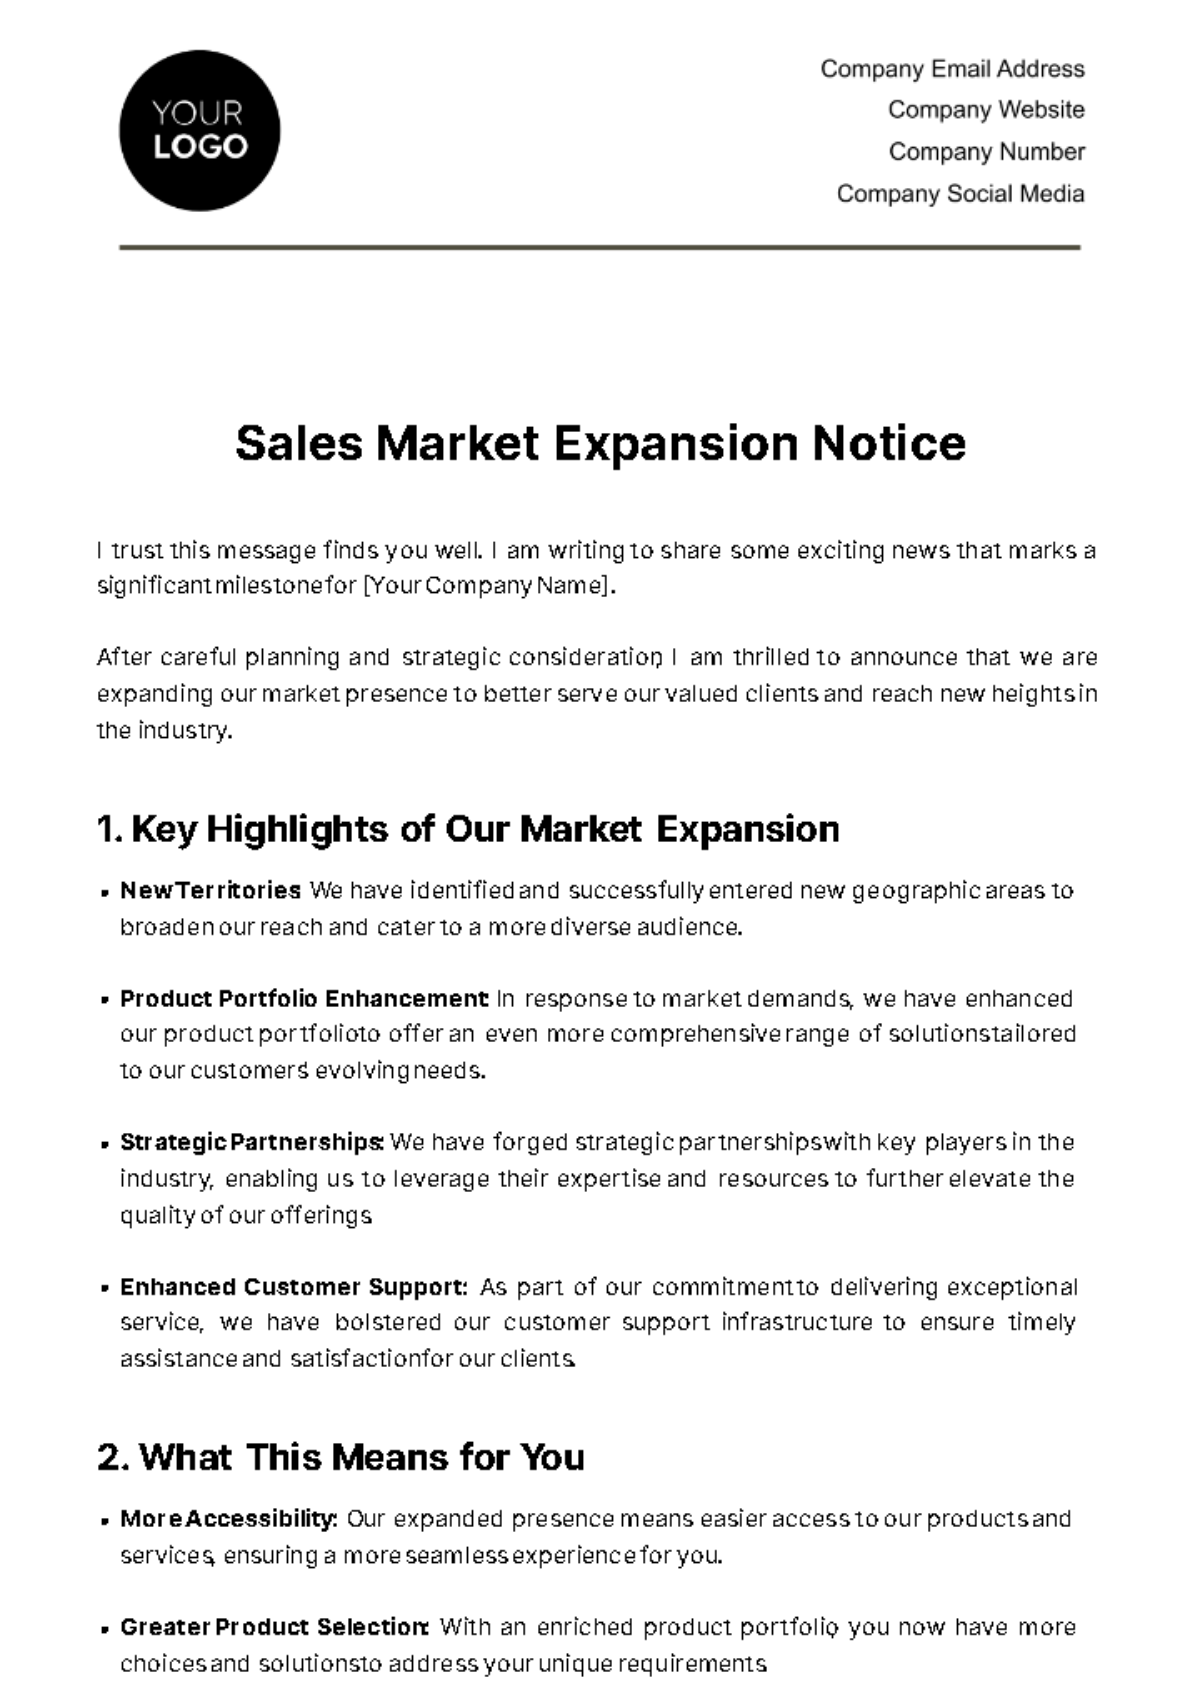 Free Sales Market Expansion Notice Template